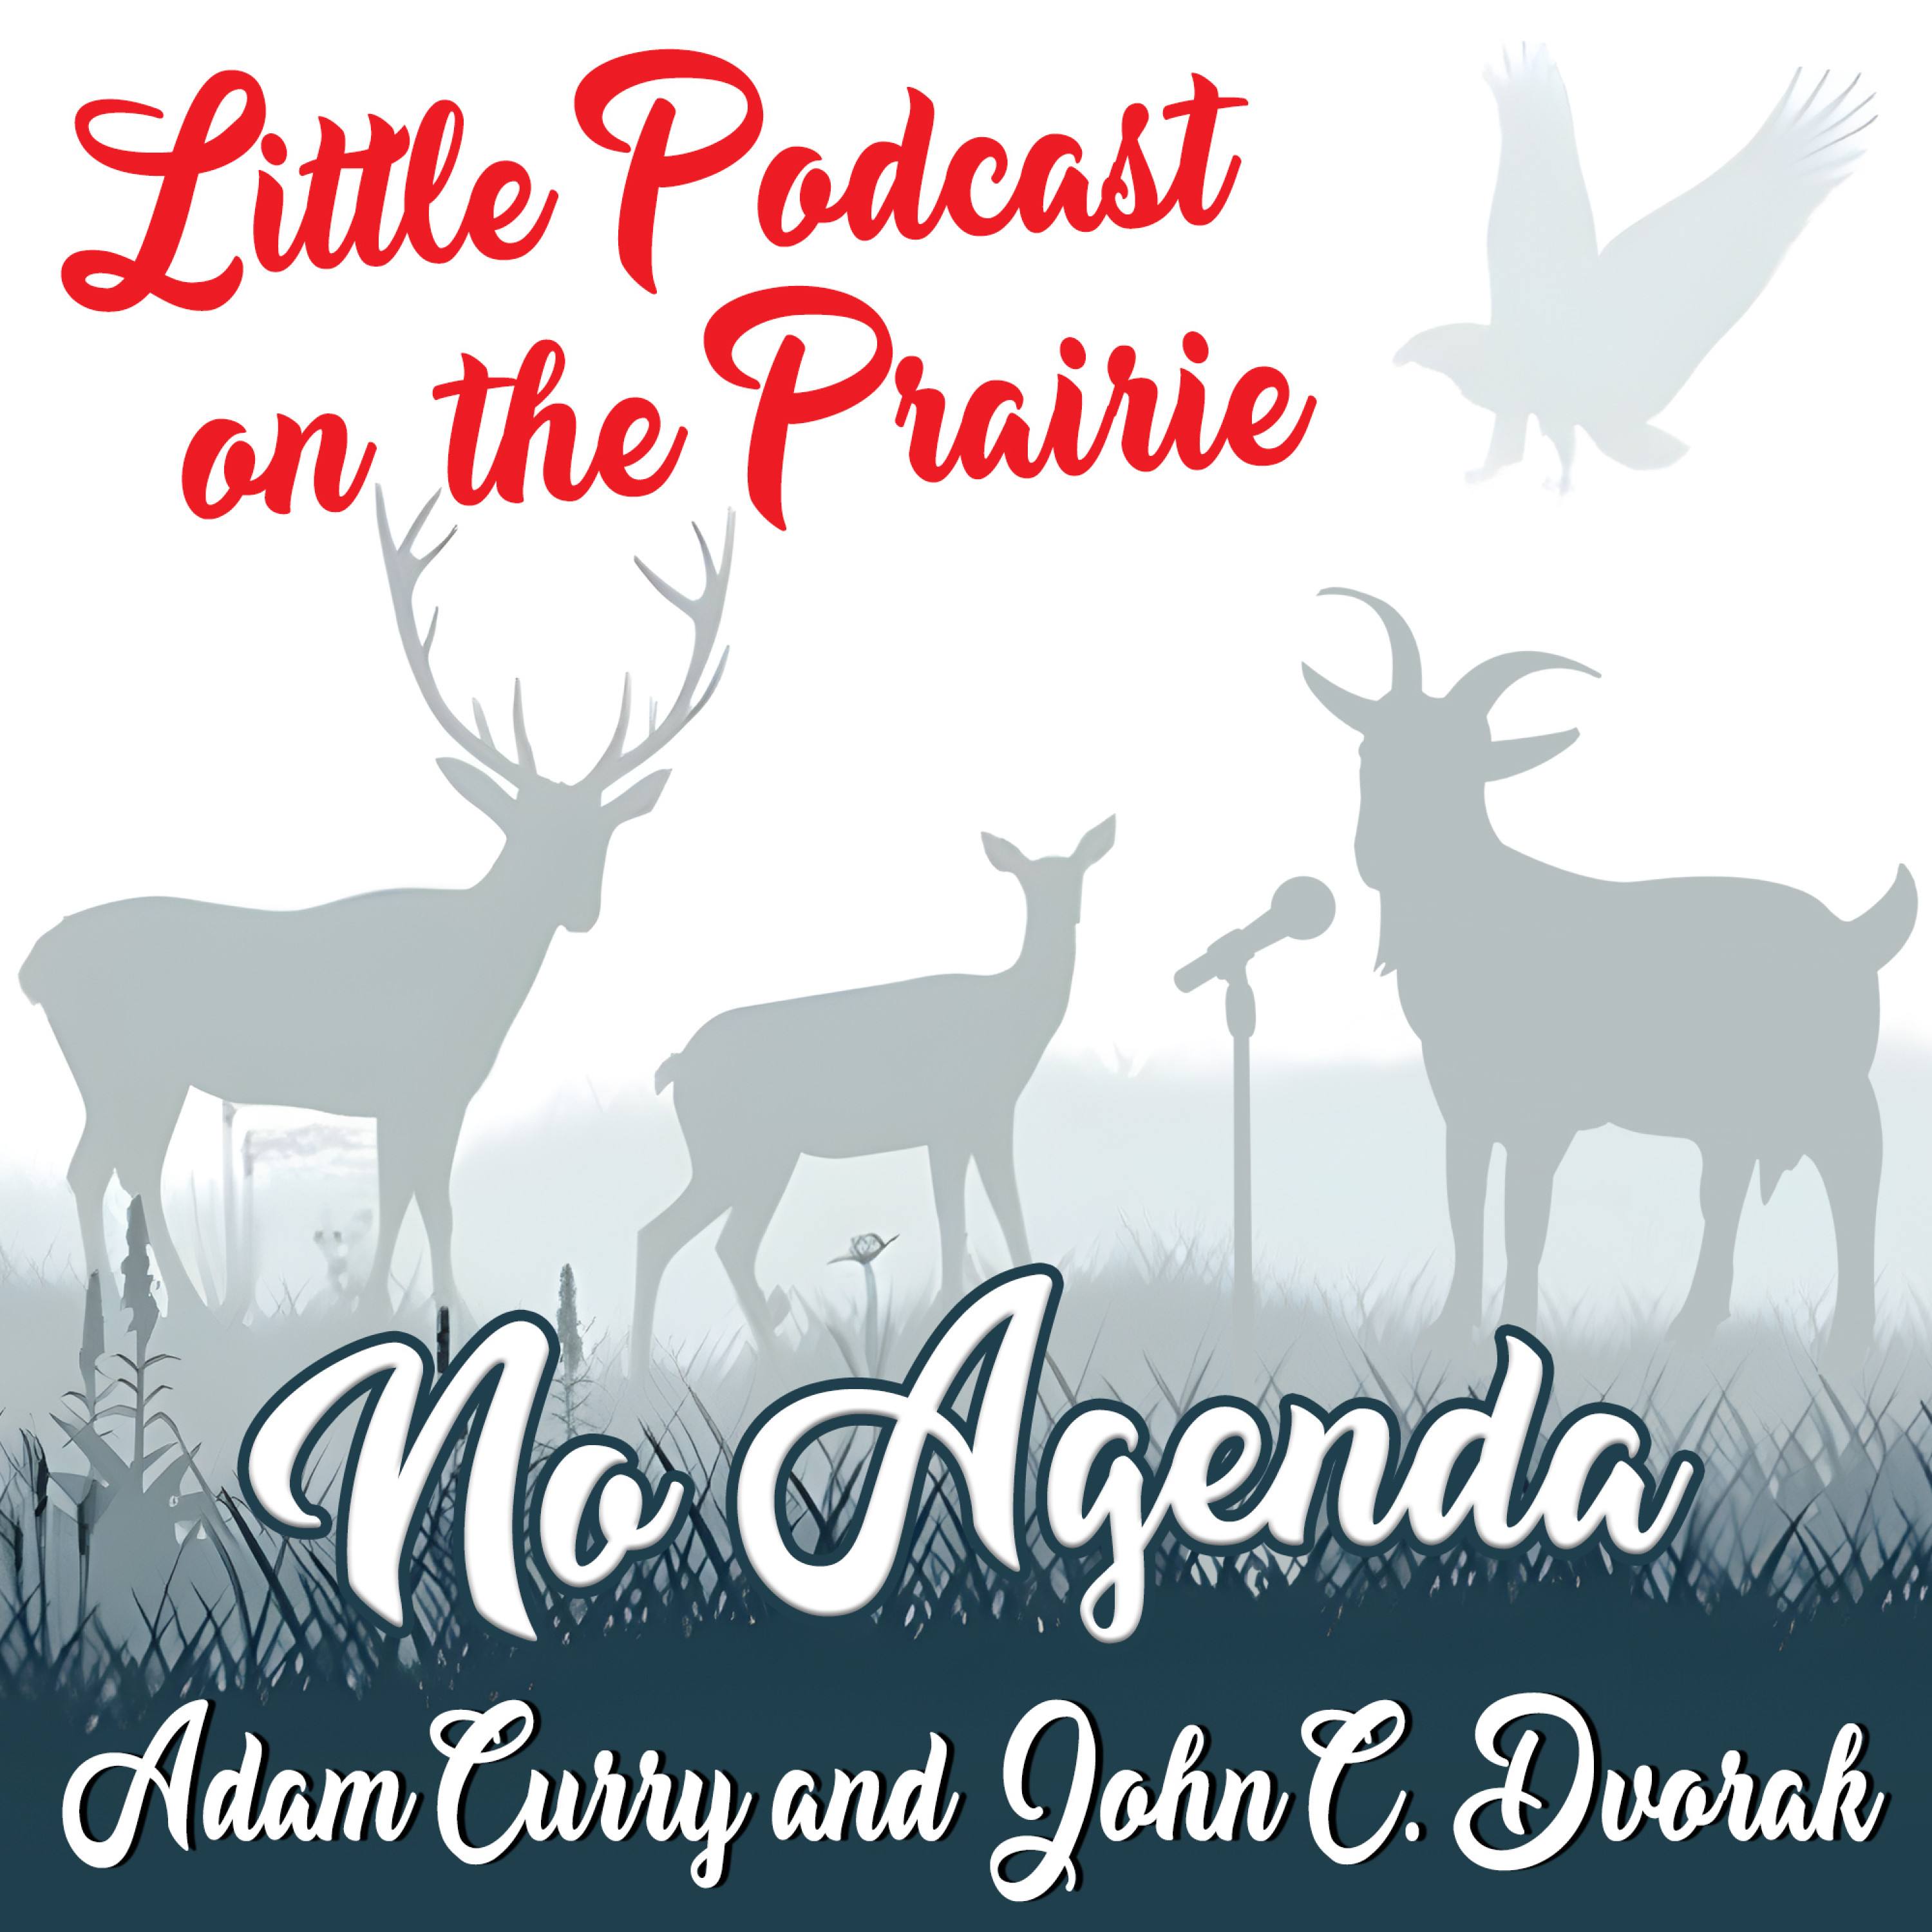 Little Podcast on the Prairie by nessworks for 